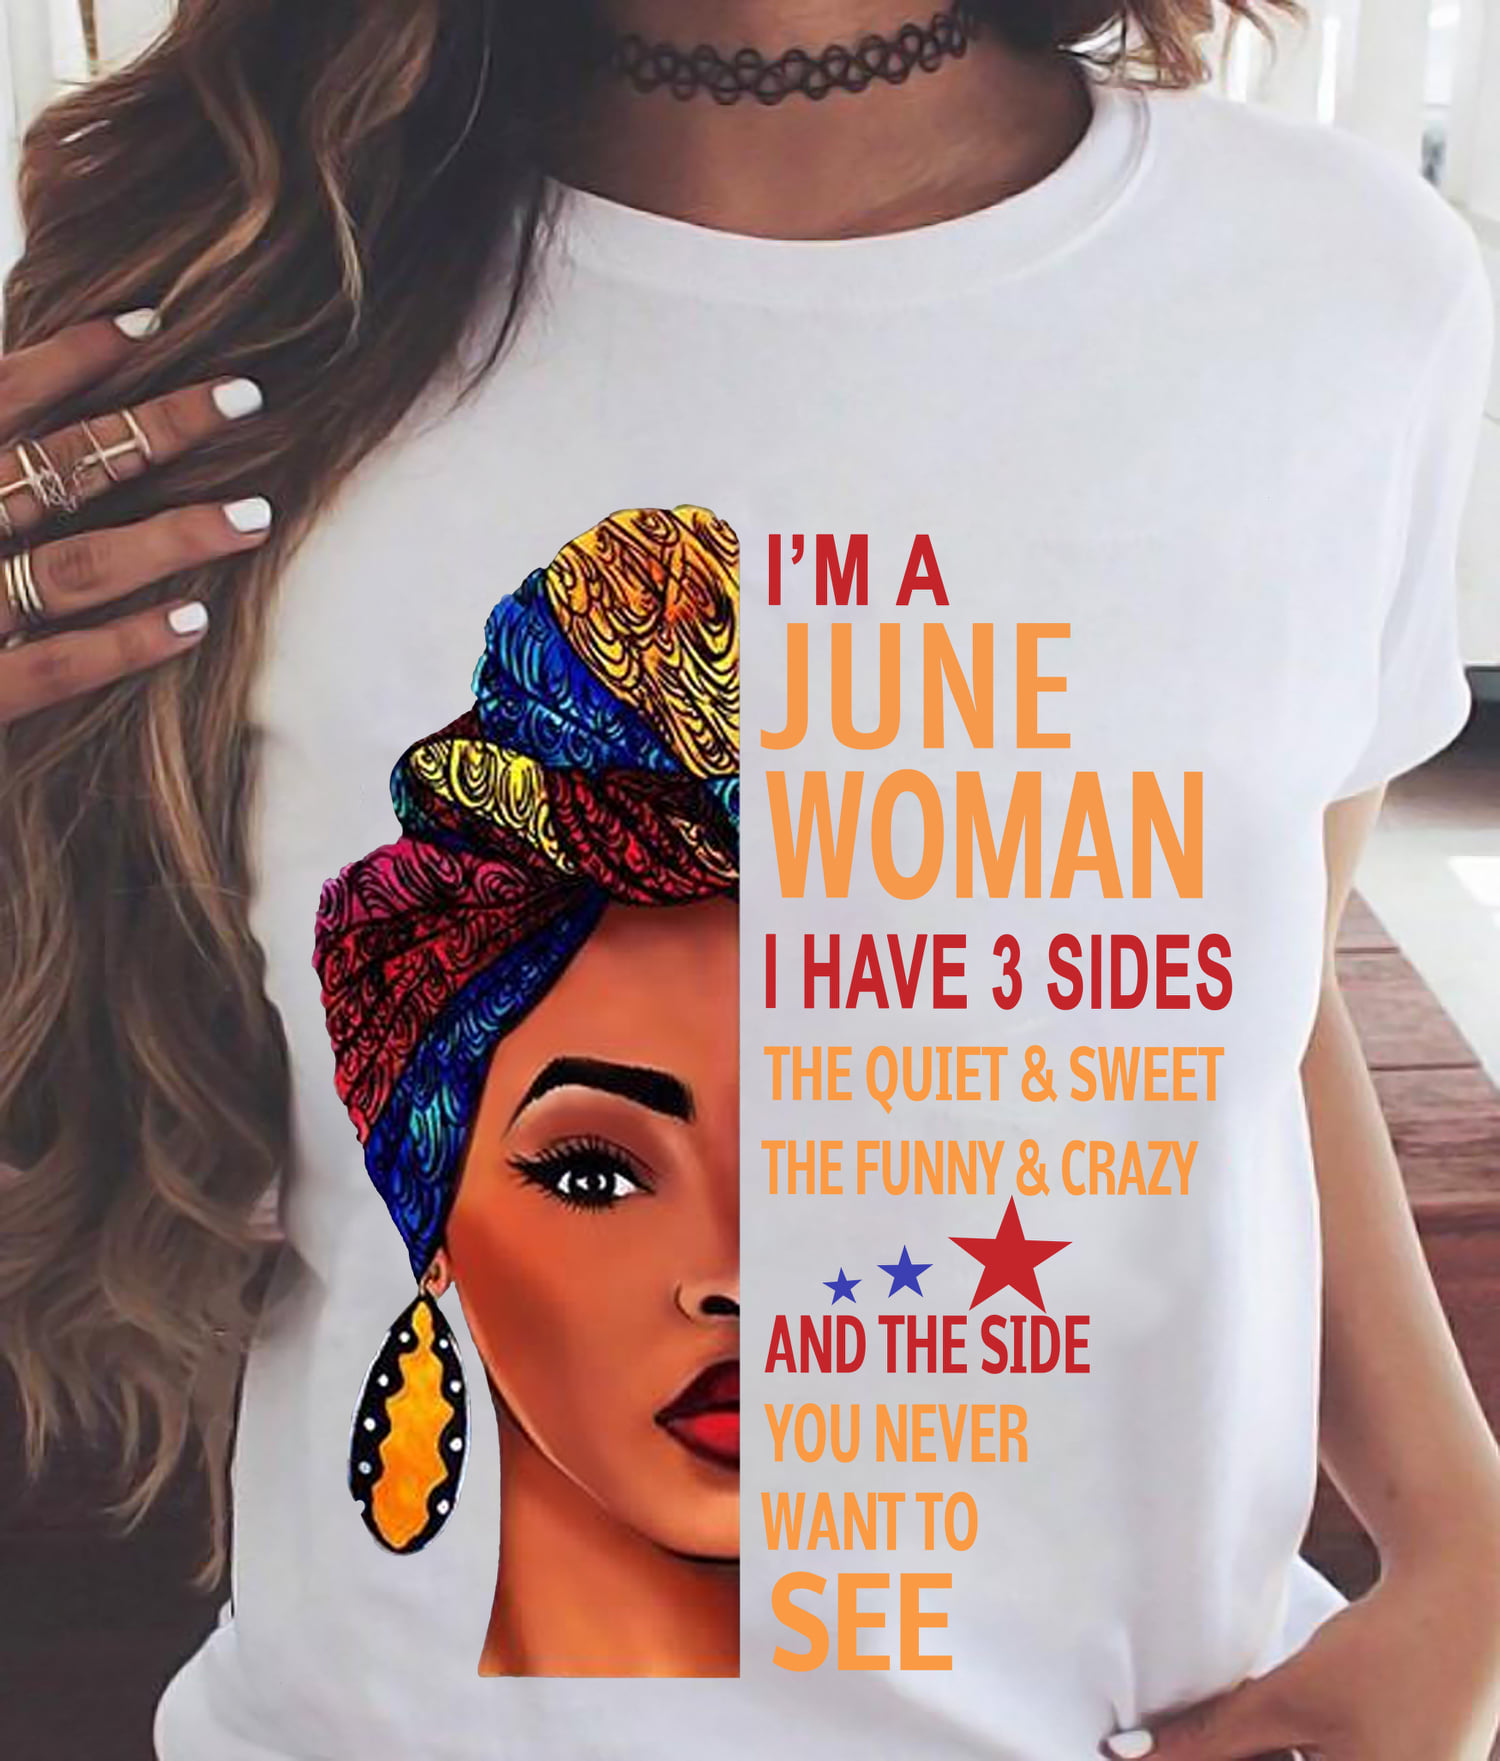 I'm a june woman I have 3 sides - Woman's personality